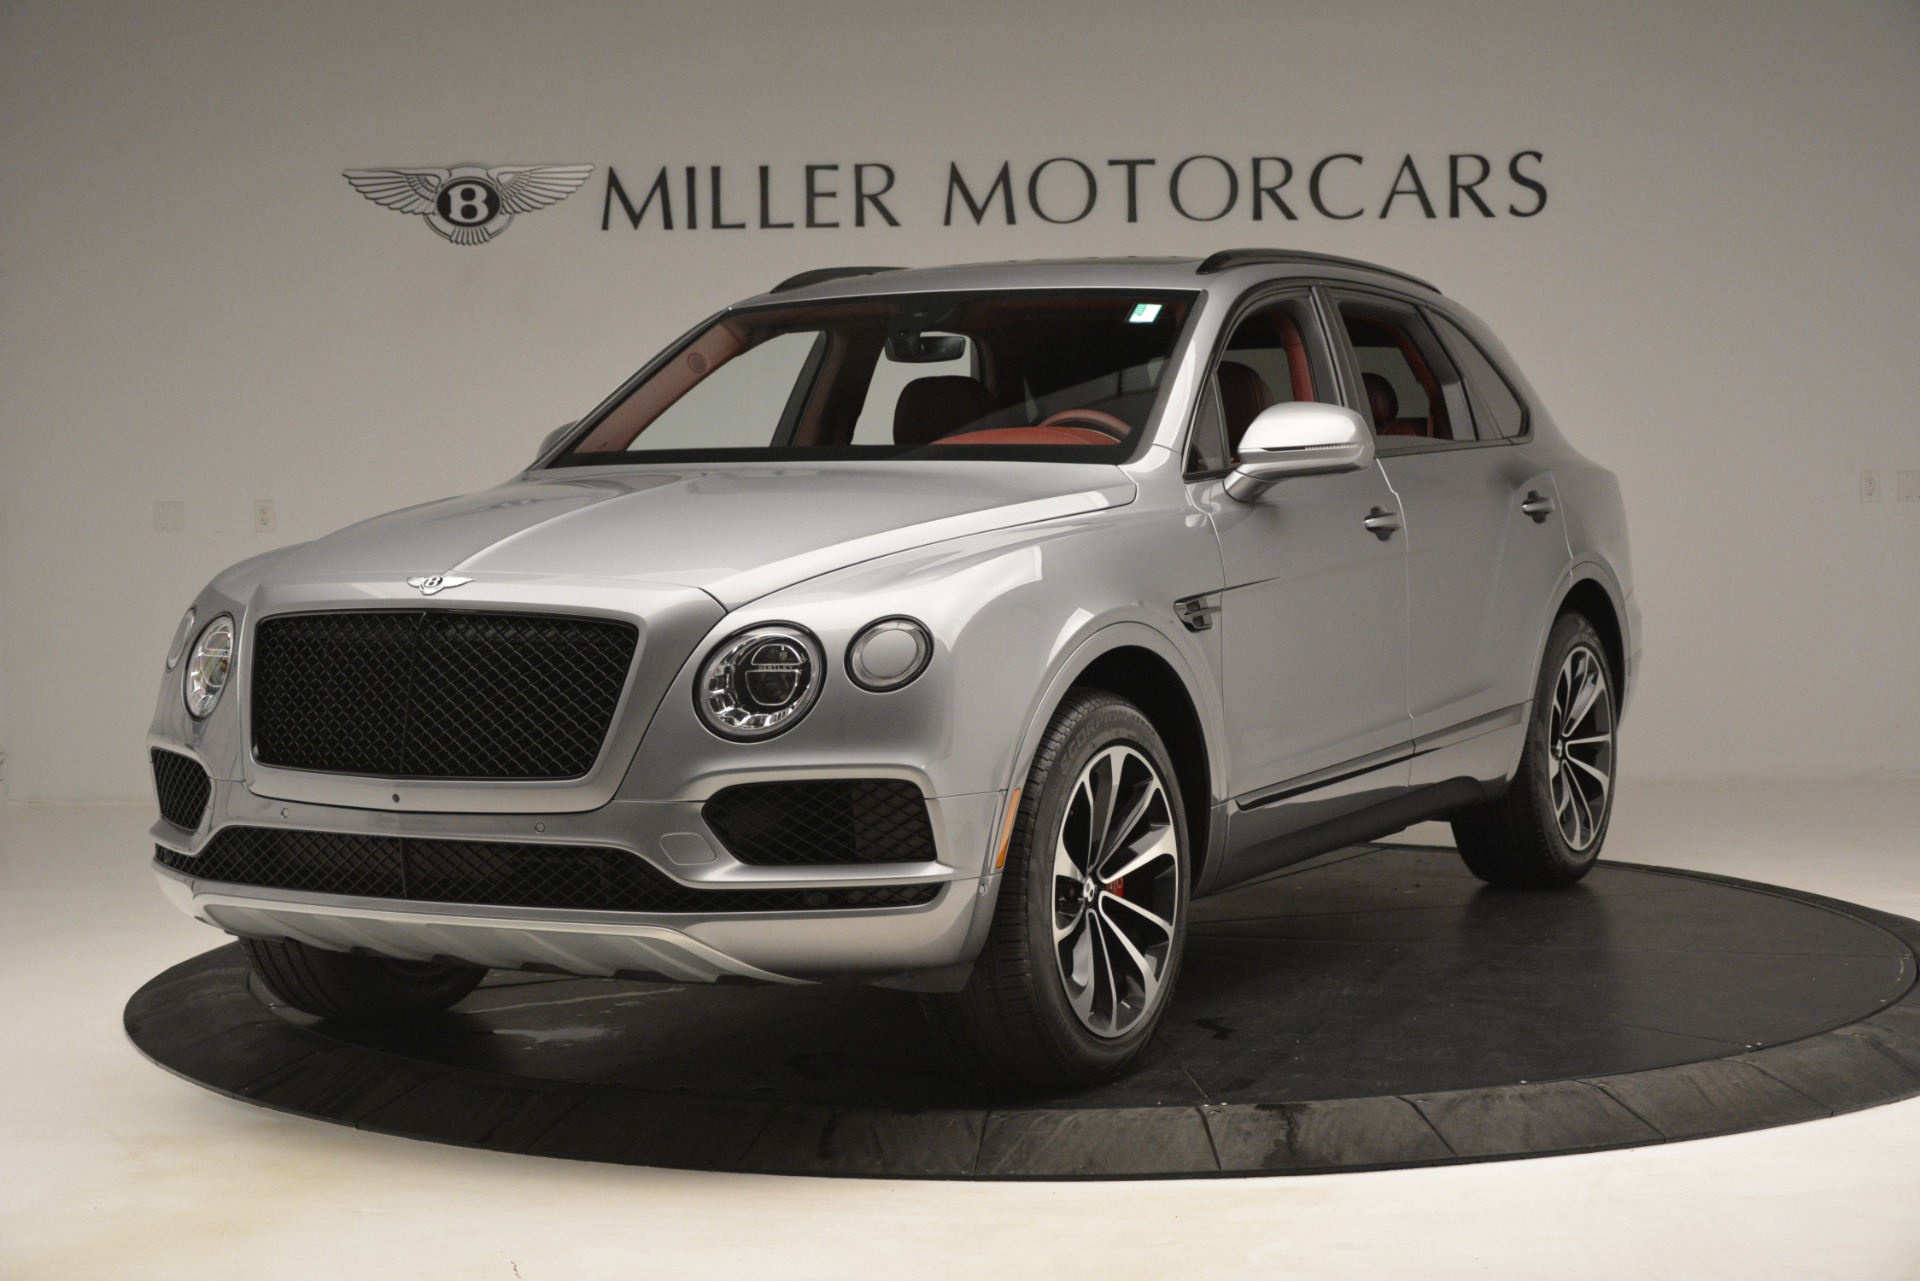 New 2019 Bentley Bentayga V8 for sale Sold at Aston Martin of Greenwich in Greenwich CT 06830 1